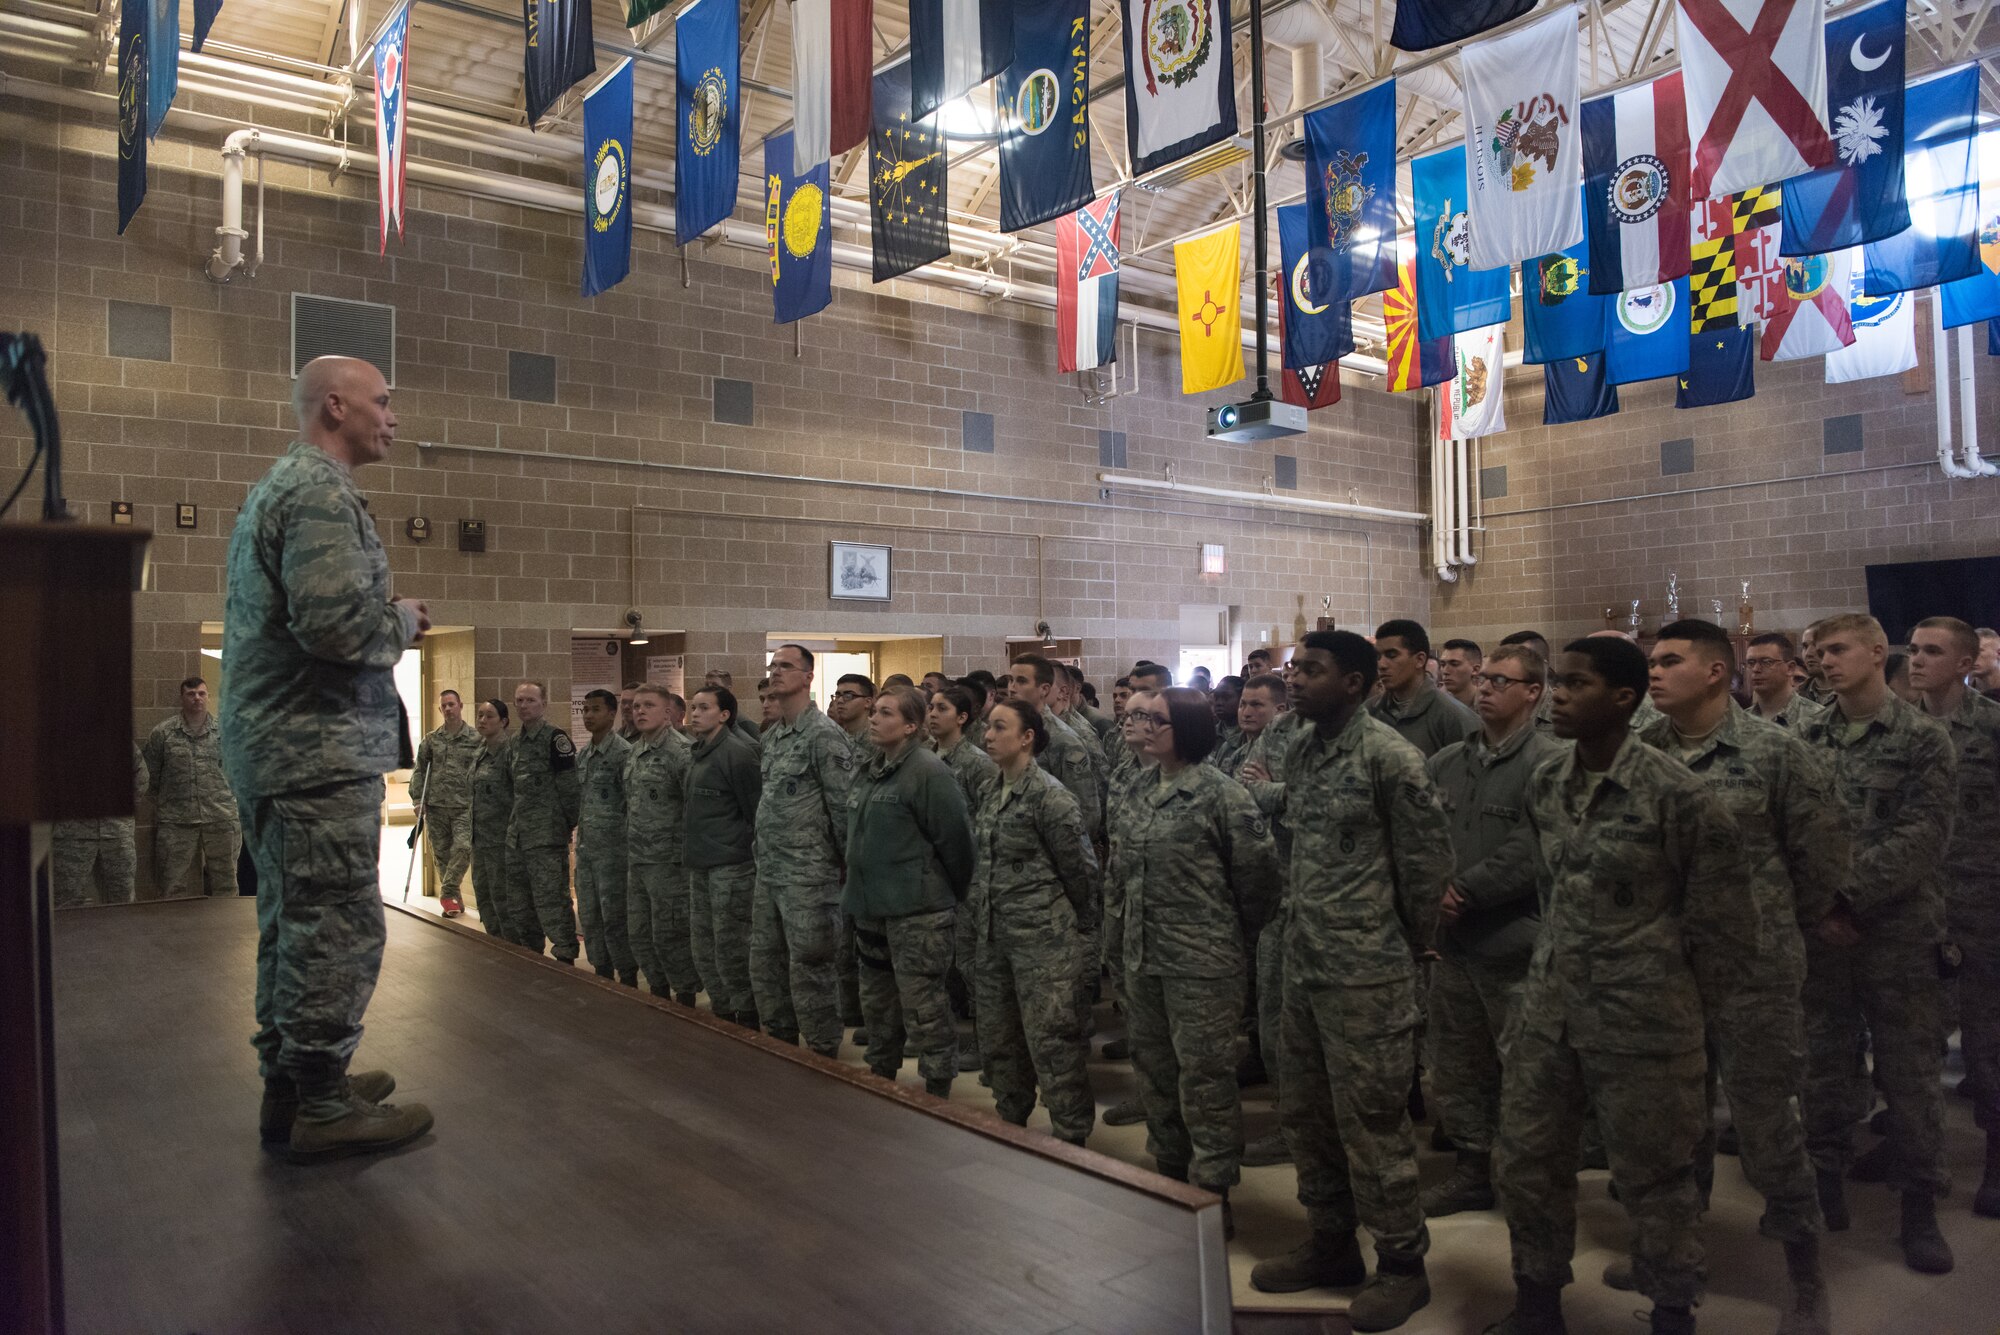 U.S. Air Force Col. Mike Manion, 55th Wing commander, speaks at a 55th Security Forces Squadron all call March 27, 2018, at Offutt Air Force Base, Nebraska. Due to a recent uptick of security breaches at Air Force bases across the world, Chief of Staff of the Air Force Gen. David Goldfein directed installation commanders to address potential vulnerabilities March 26. (U.S. Air Force photo by Senior Airman Jacob Skovo)